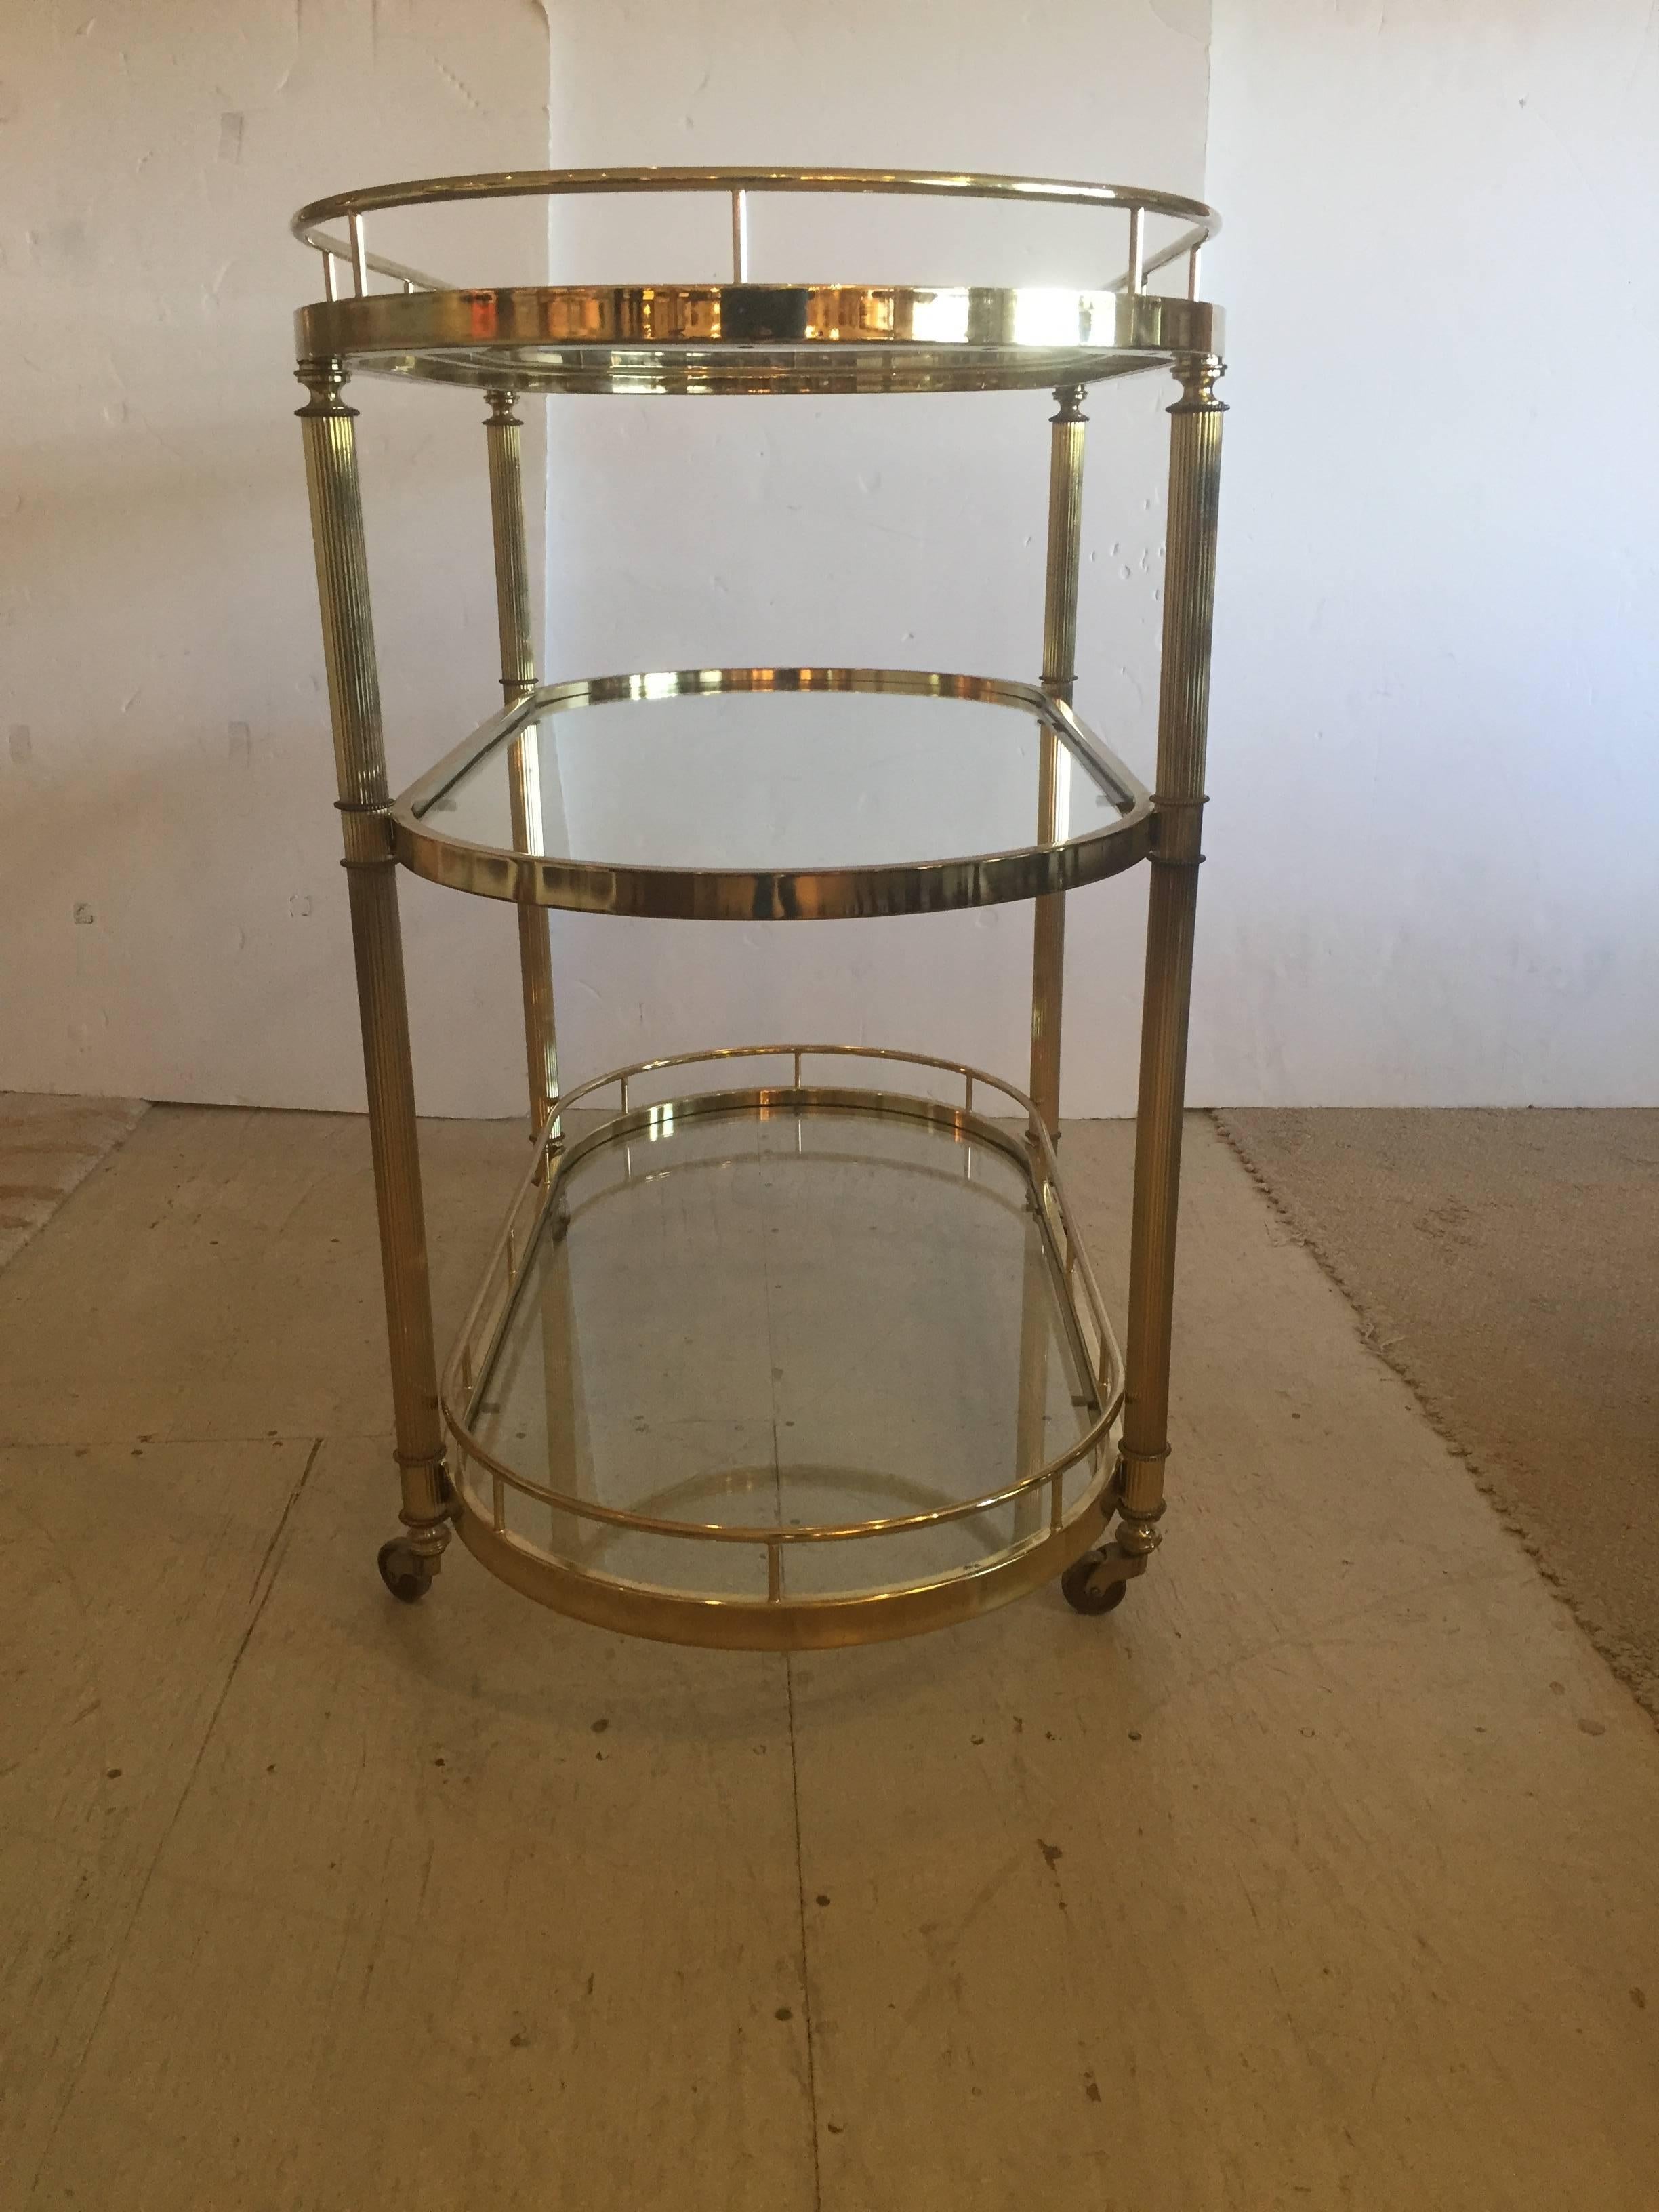 Stately Mid-Century Modern fluted brass bar cart on casters with three oval glass shelves.